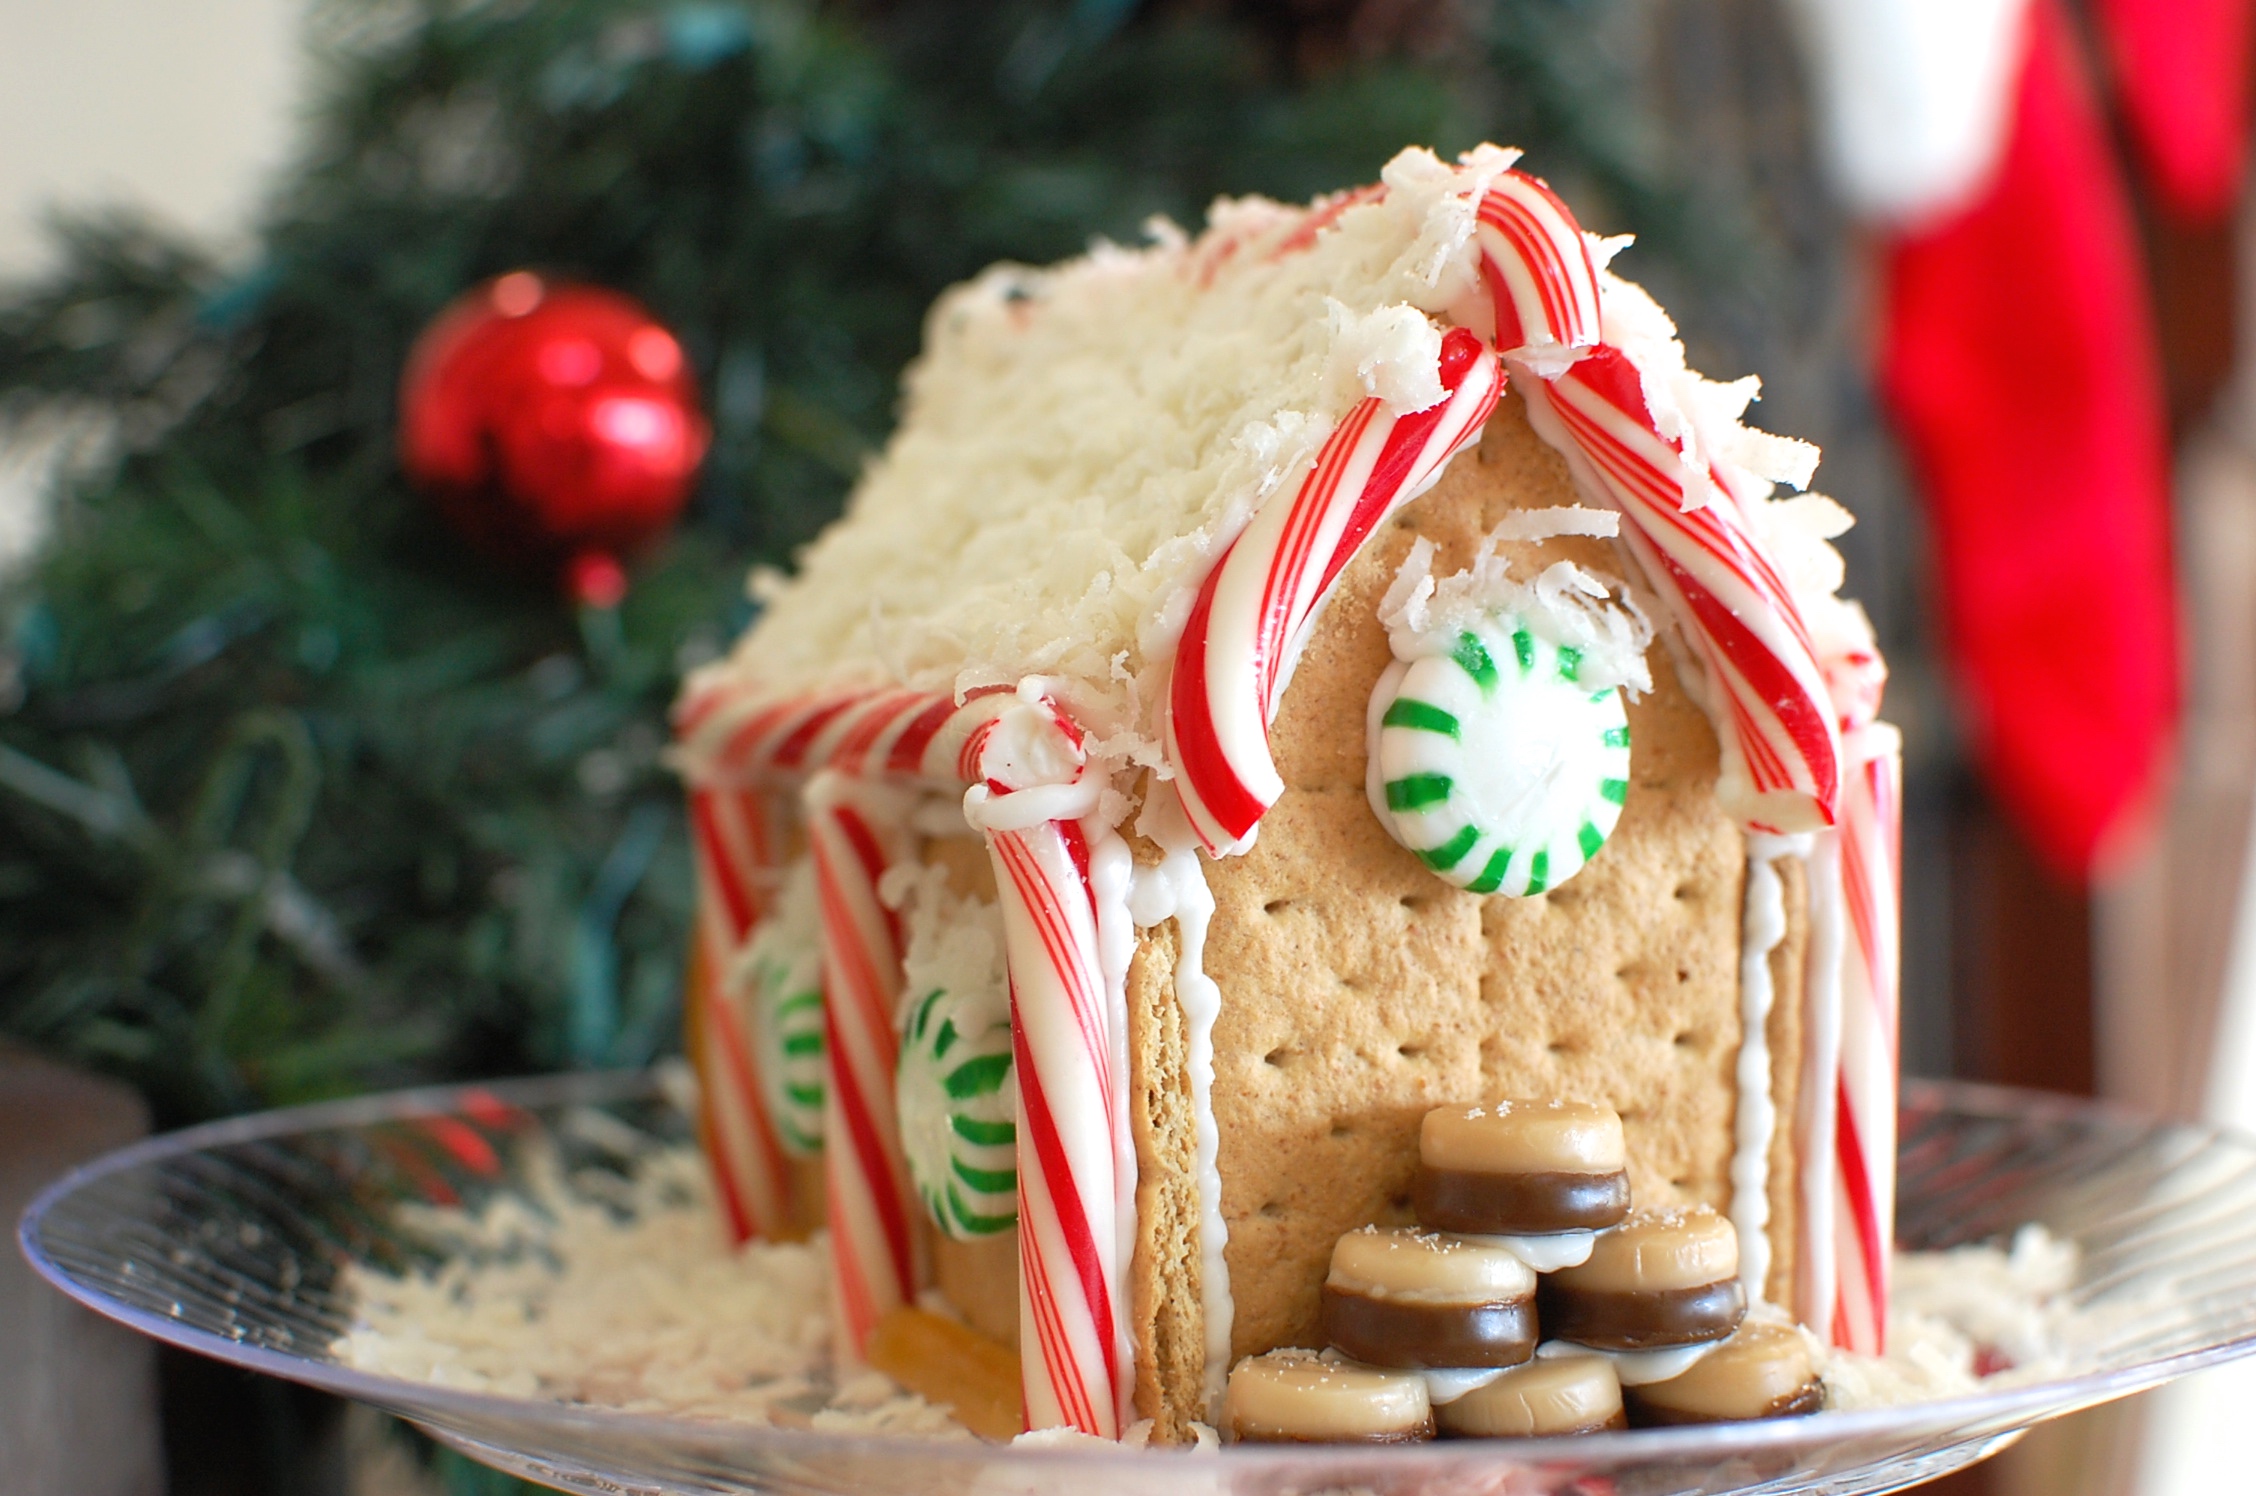 A gingerbread house made of graham crackers with a coconut roof.